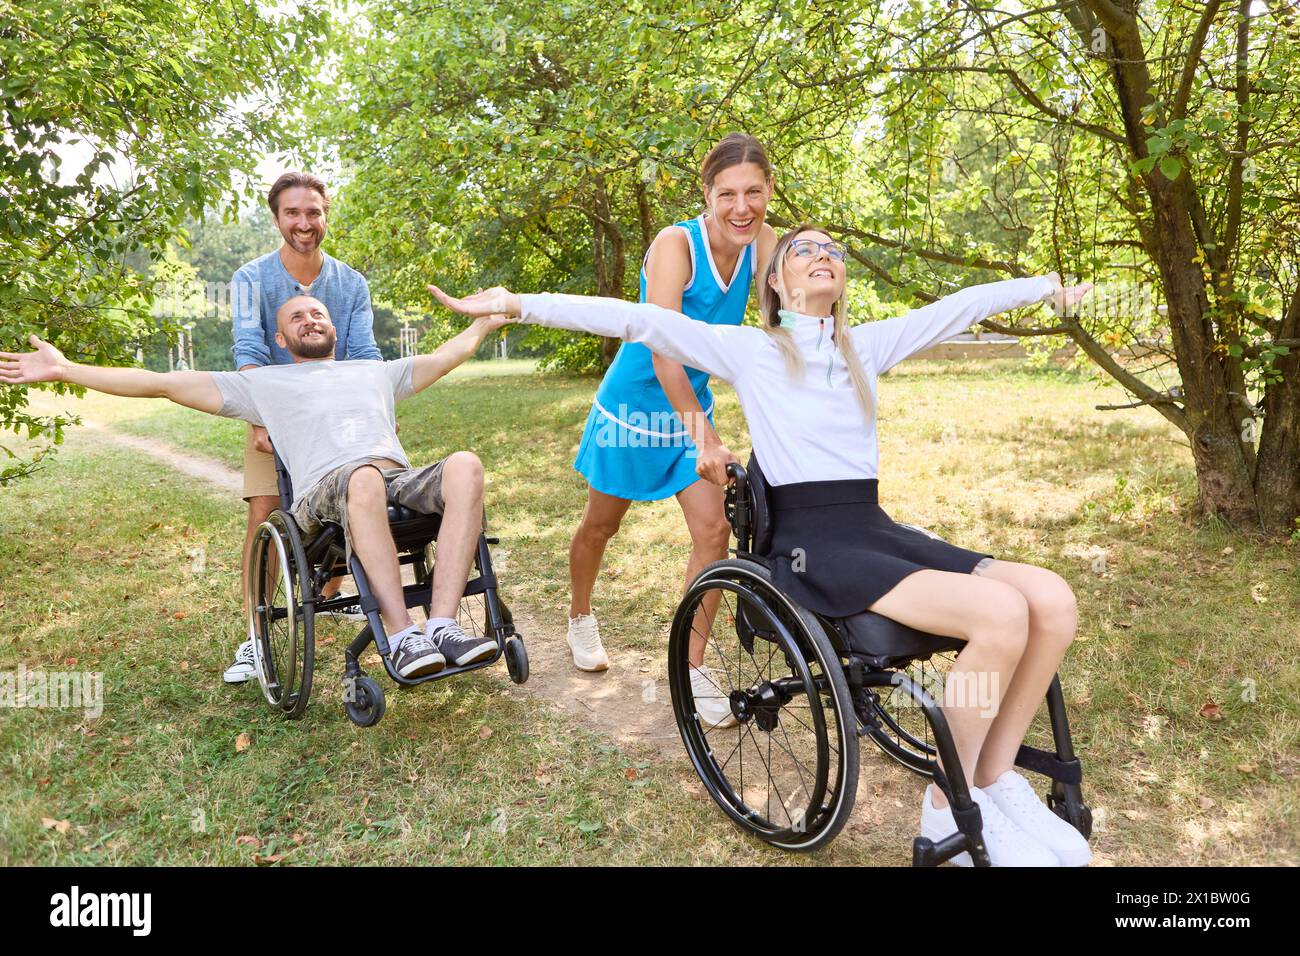 A group of friends, including two people using wheelchairs, enjoy a happy moment outdoors, showcasing diversity and accessibility in a sunny park. Stock Photo